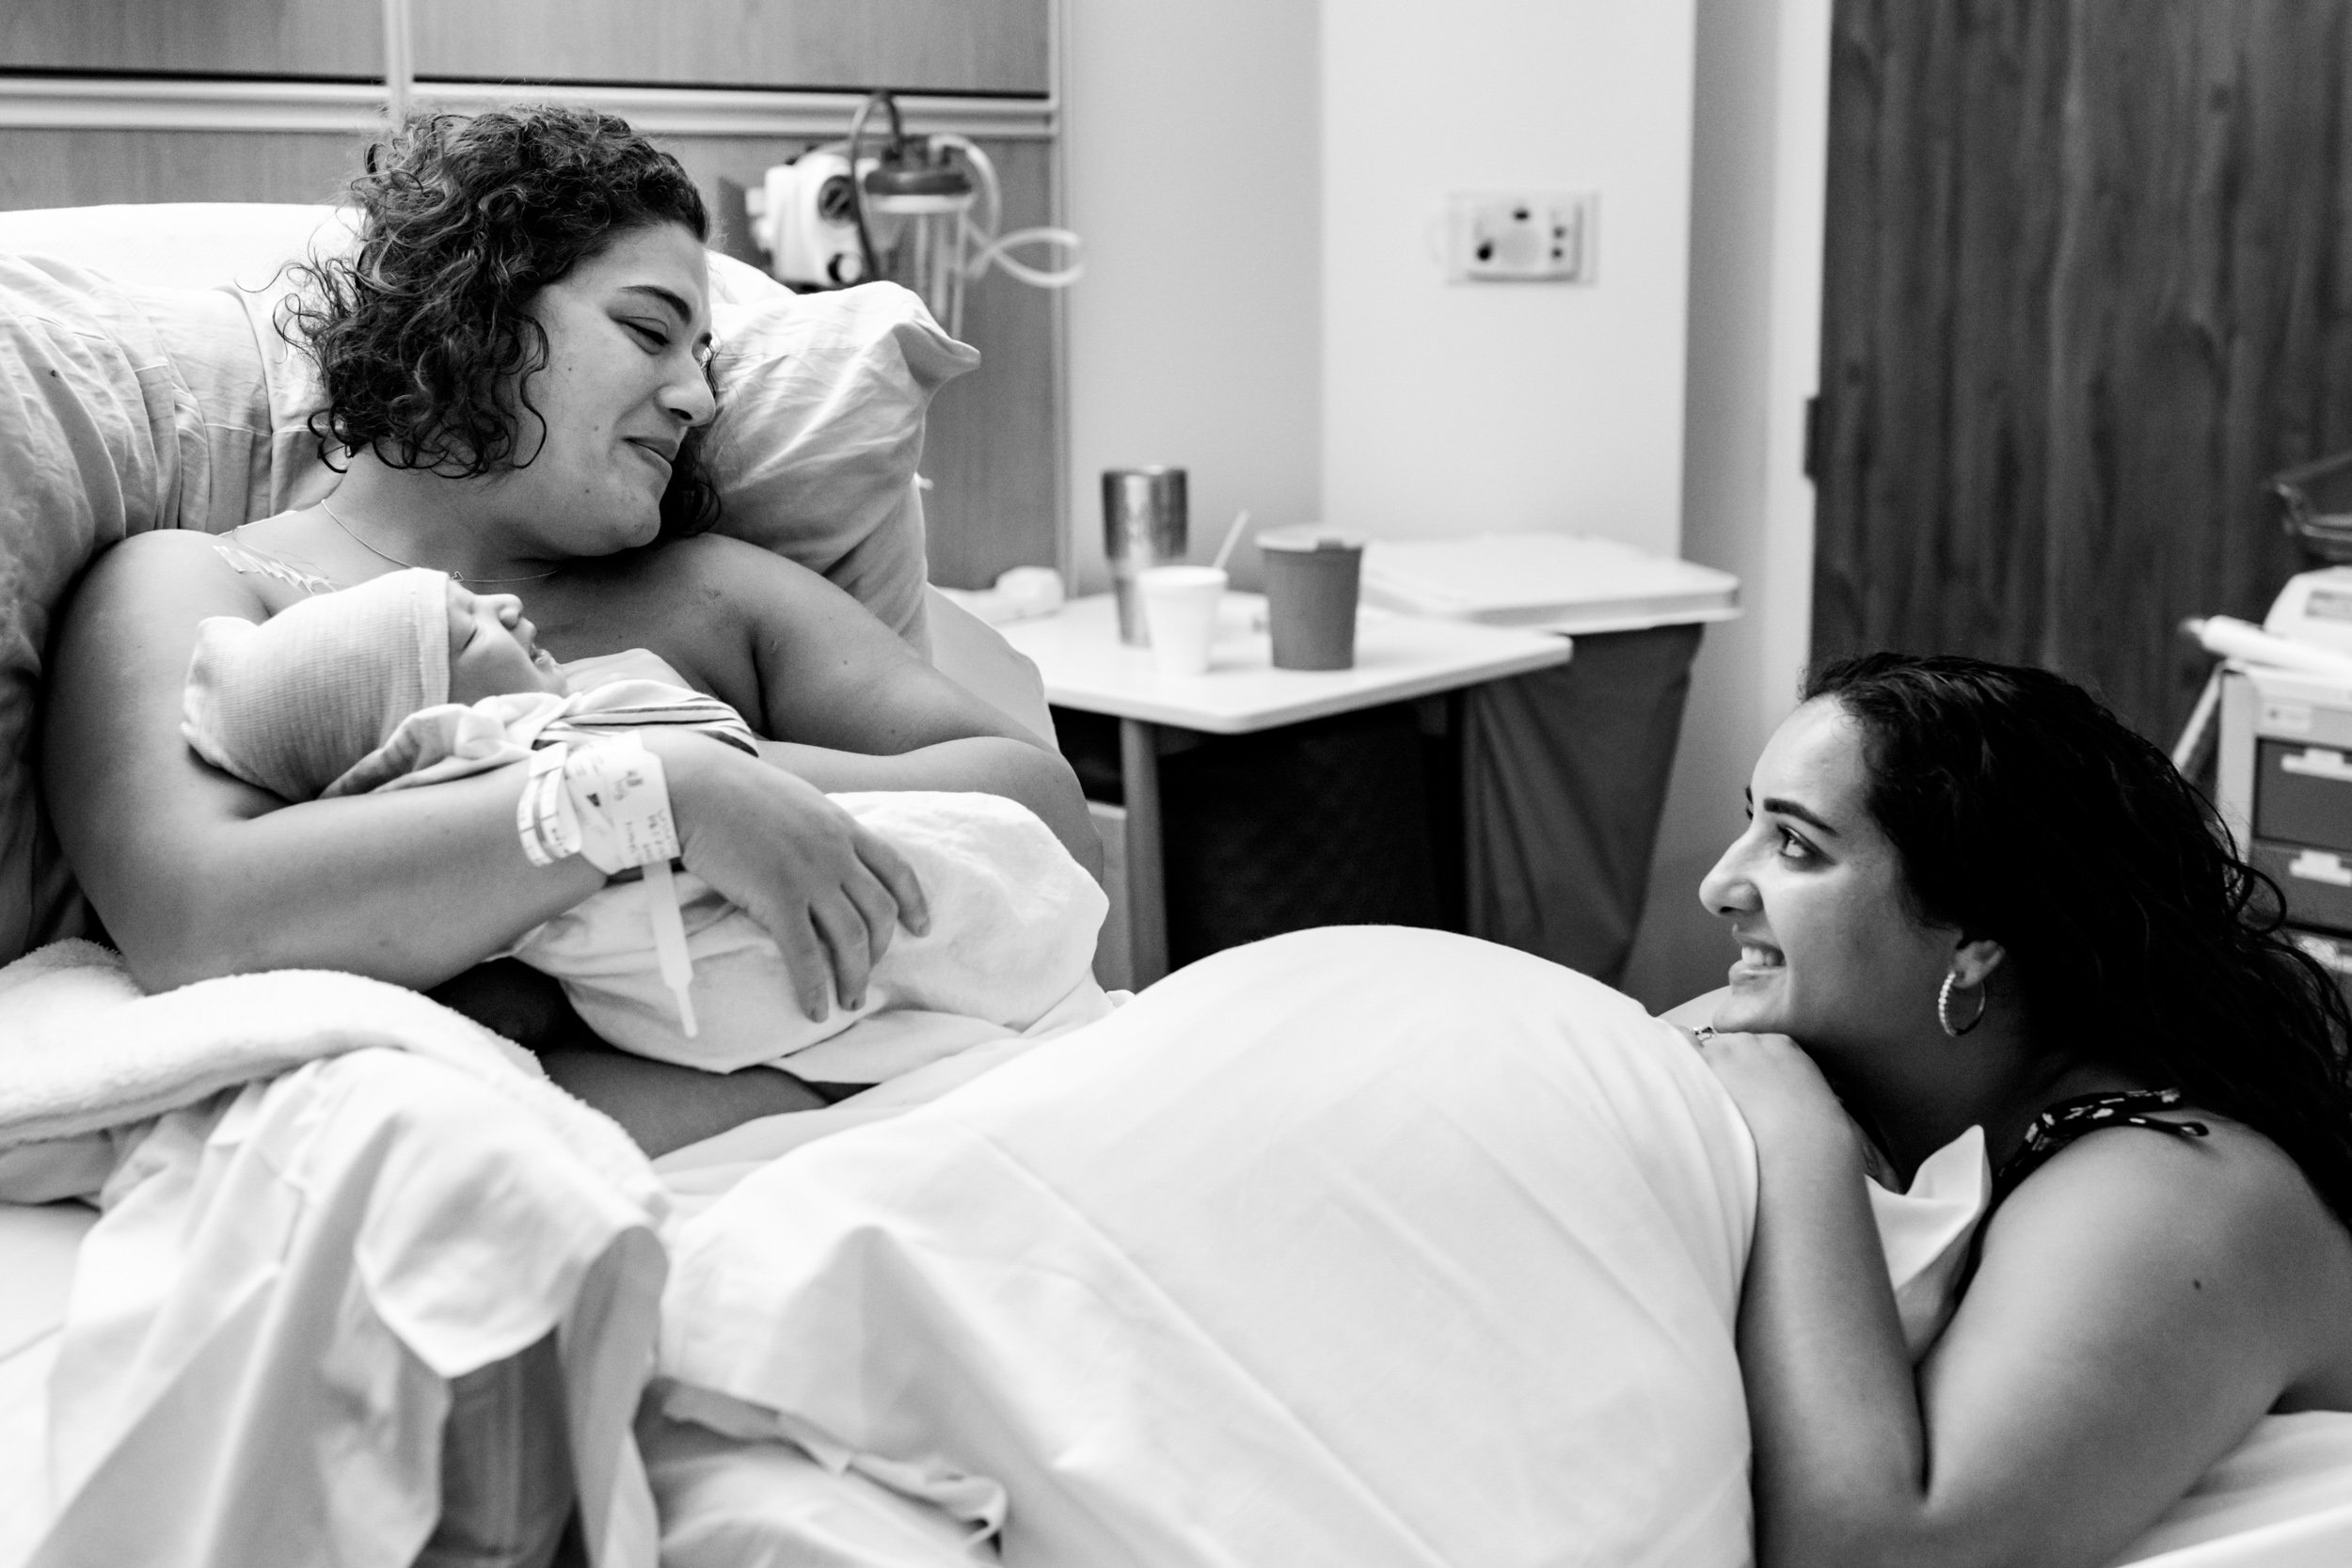 woman holding baby just after birth, while her sister looks on with admiration